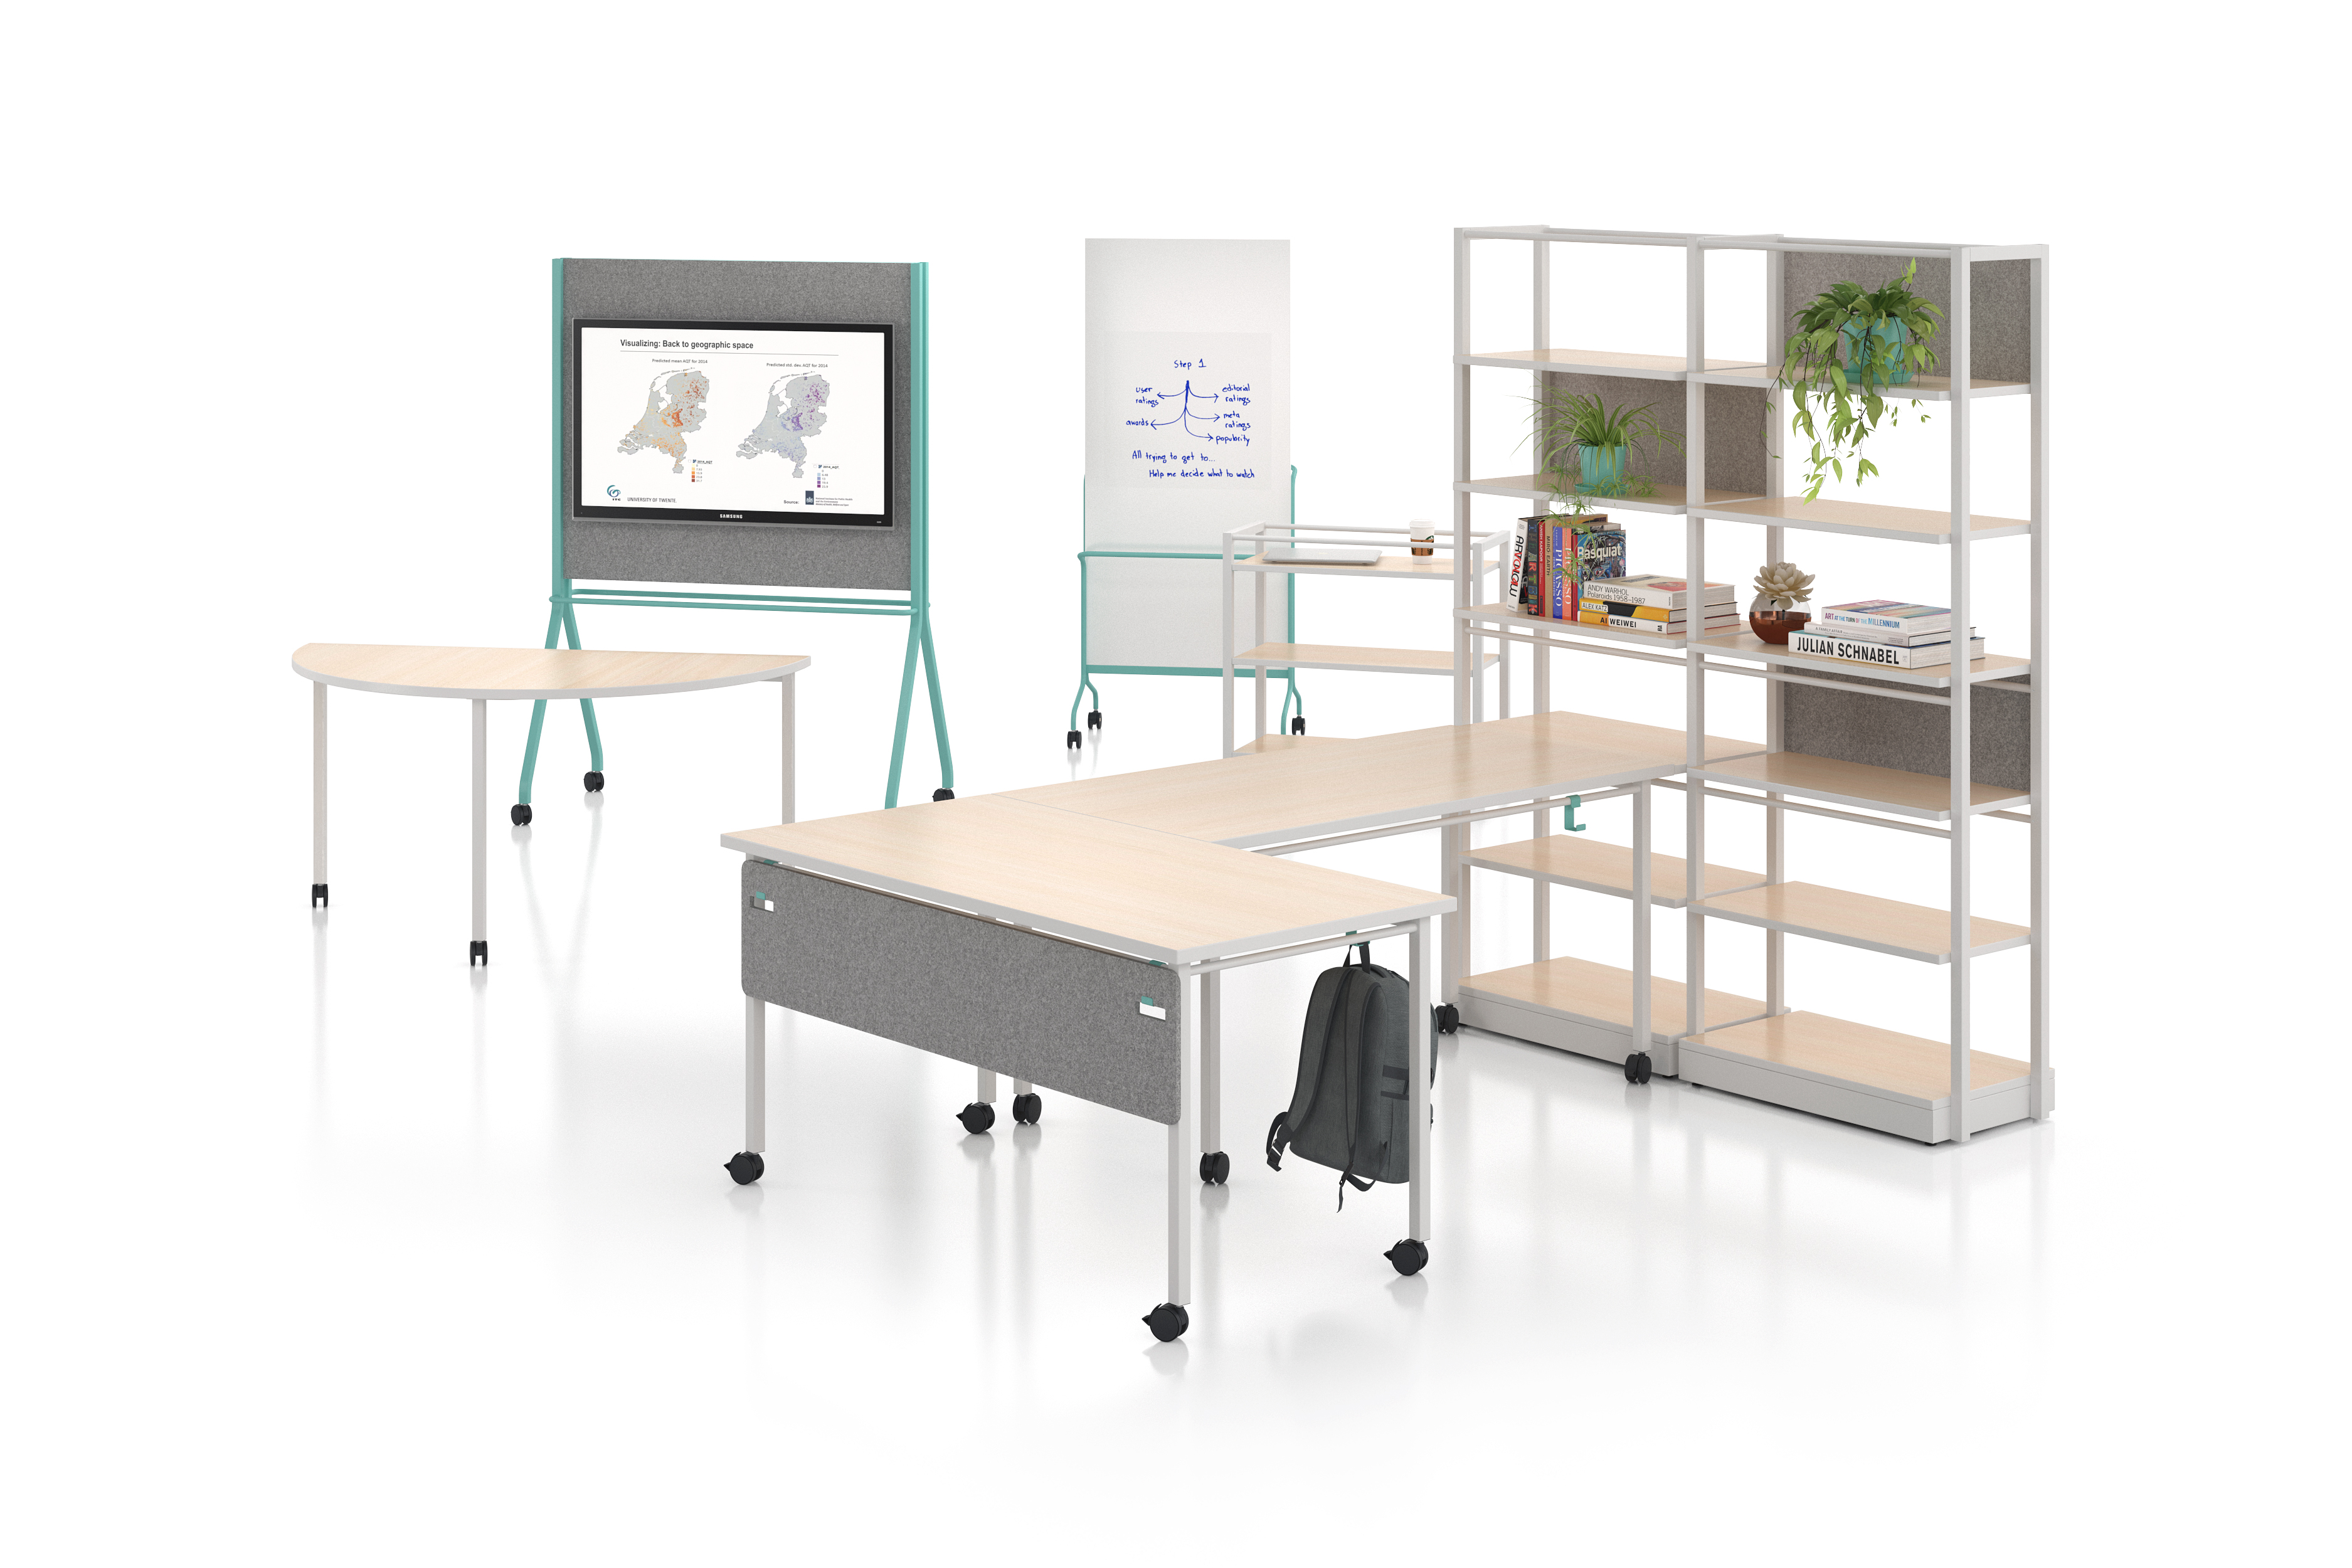 configurable furniture collection on white background. includes connected tables, shelves, media wall, whiteboard and hospitality cart.